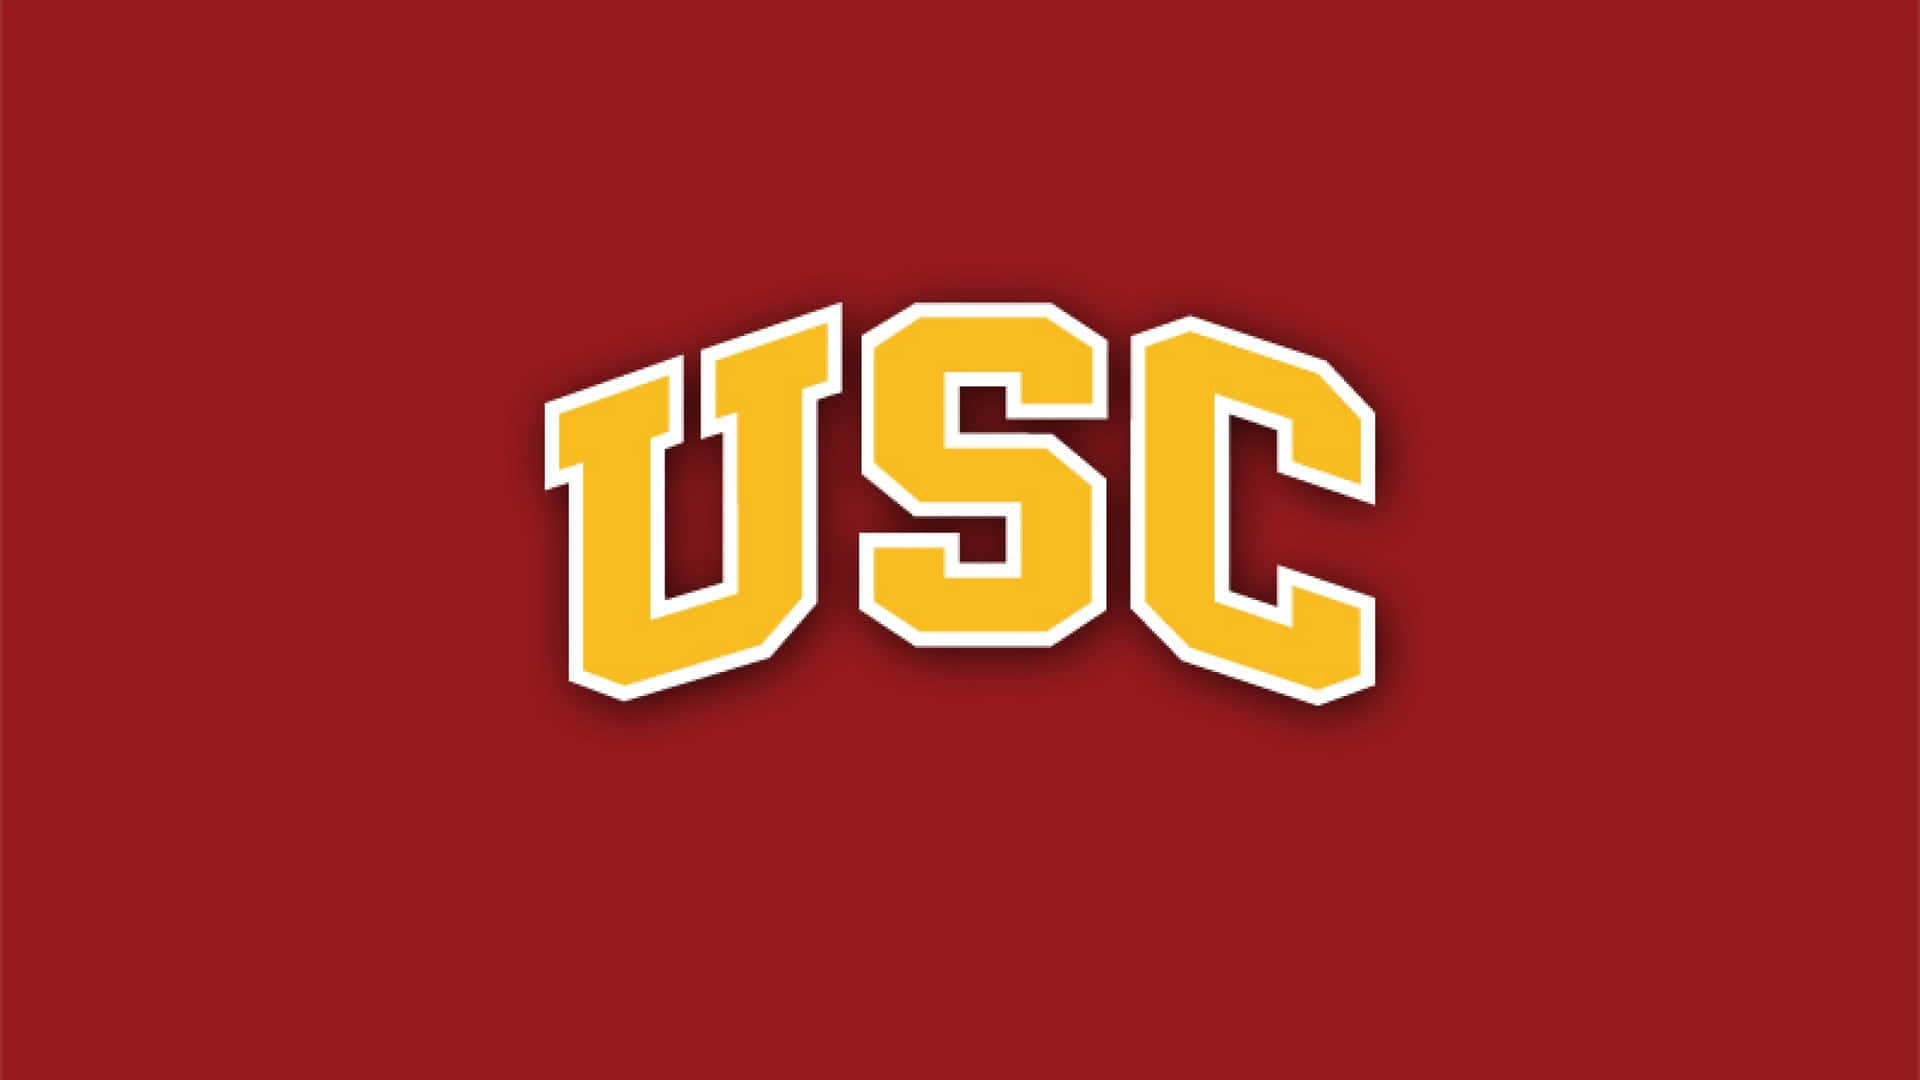 Usc Logo On A Red Background Wallpaper